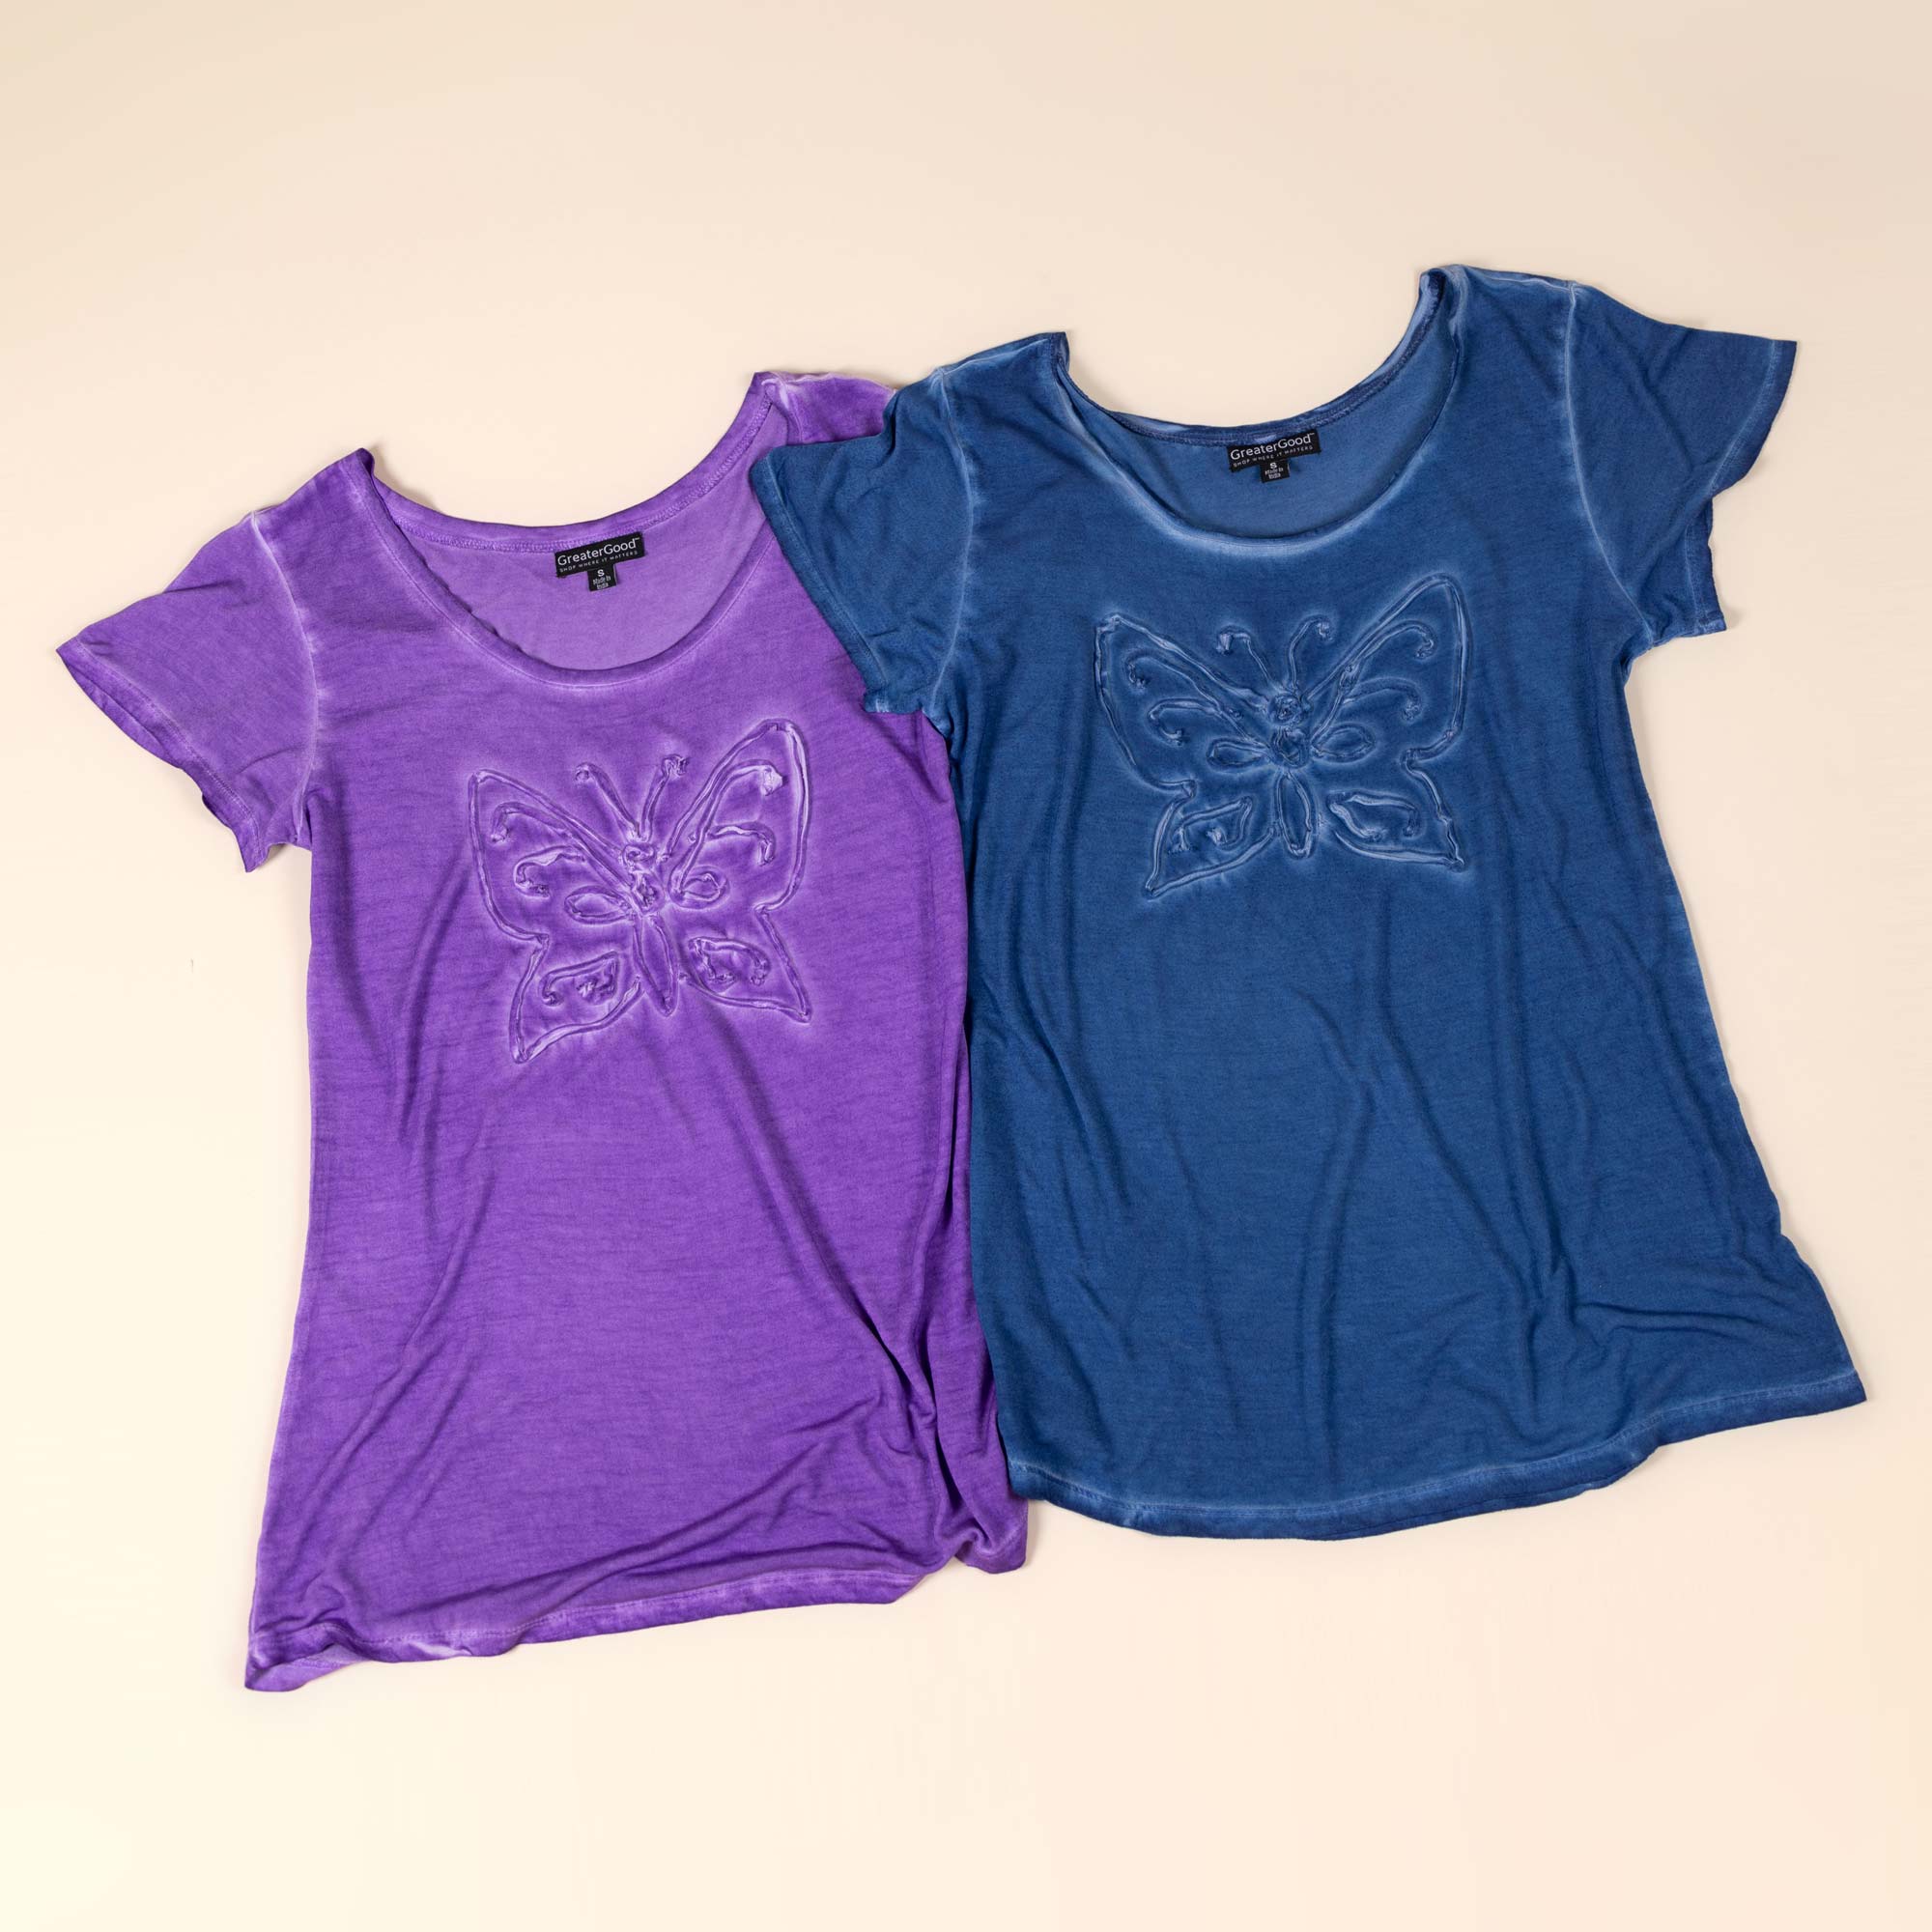 A purple, and a blue t-shirt — each with a handwoven butterfly design